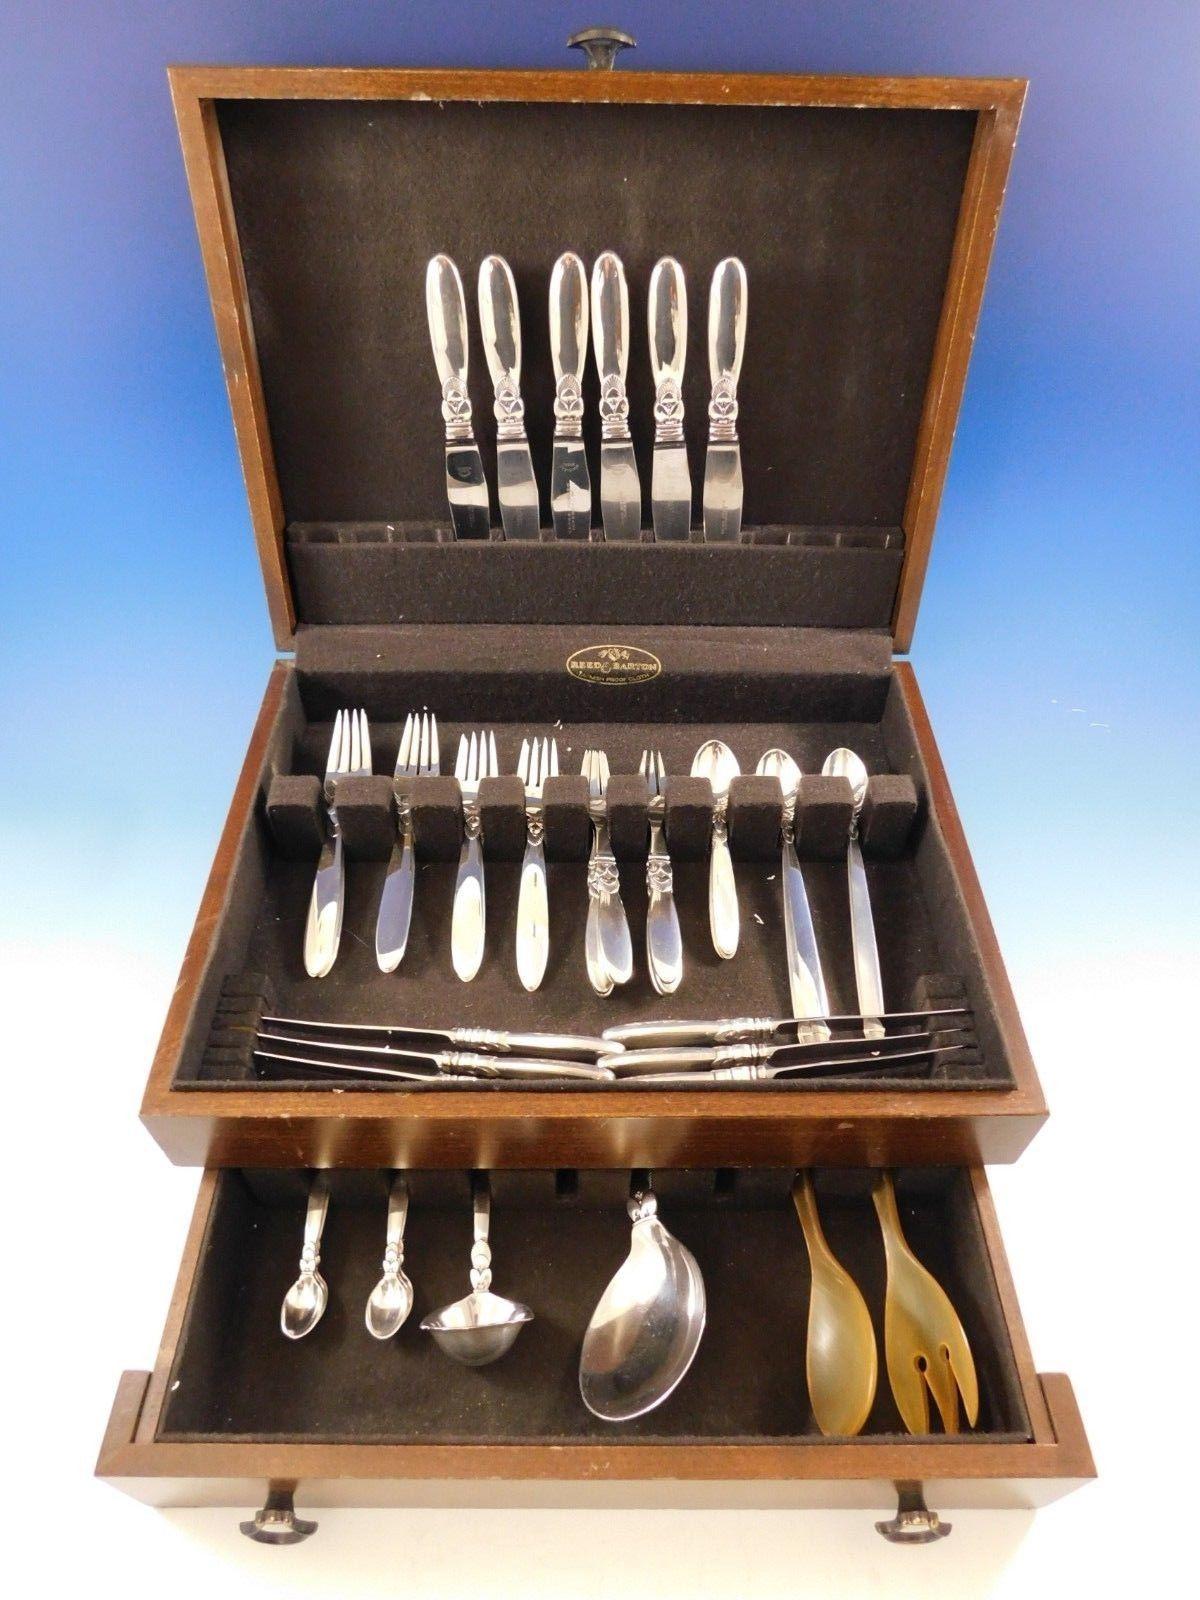 Cactus by Georg Jensen Danish sterling silver flatware set, 52 pieces. This set includes:

6 knives, short handle, 8